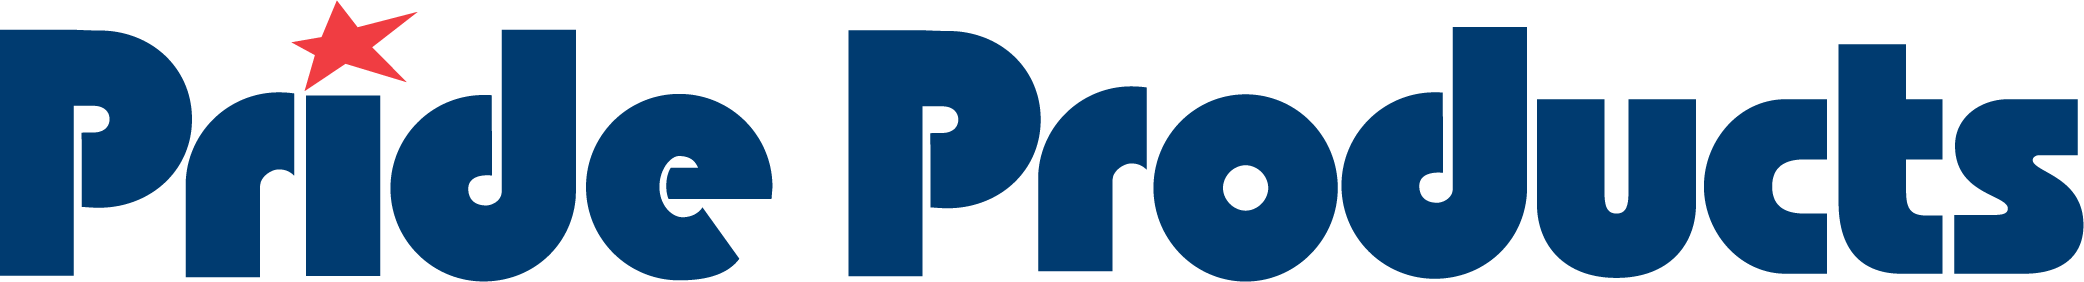 Pride Products Logo